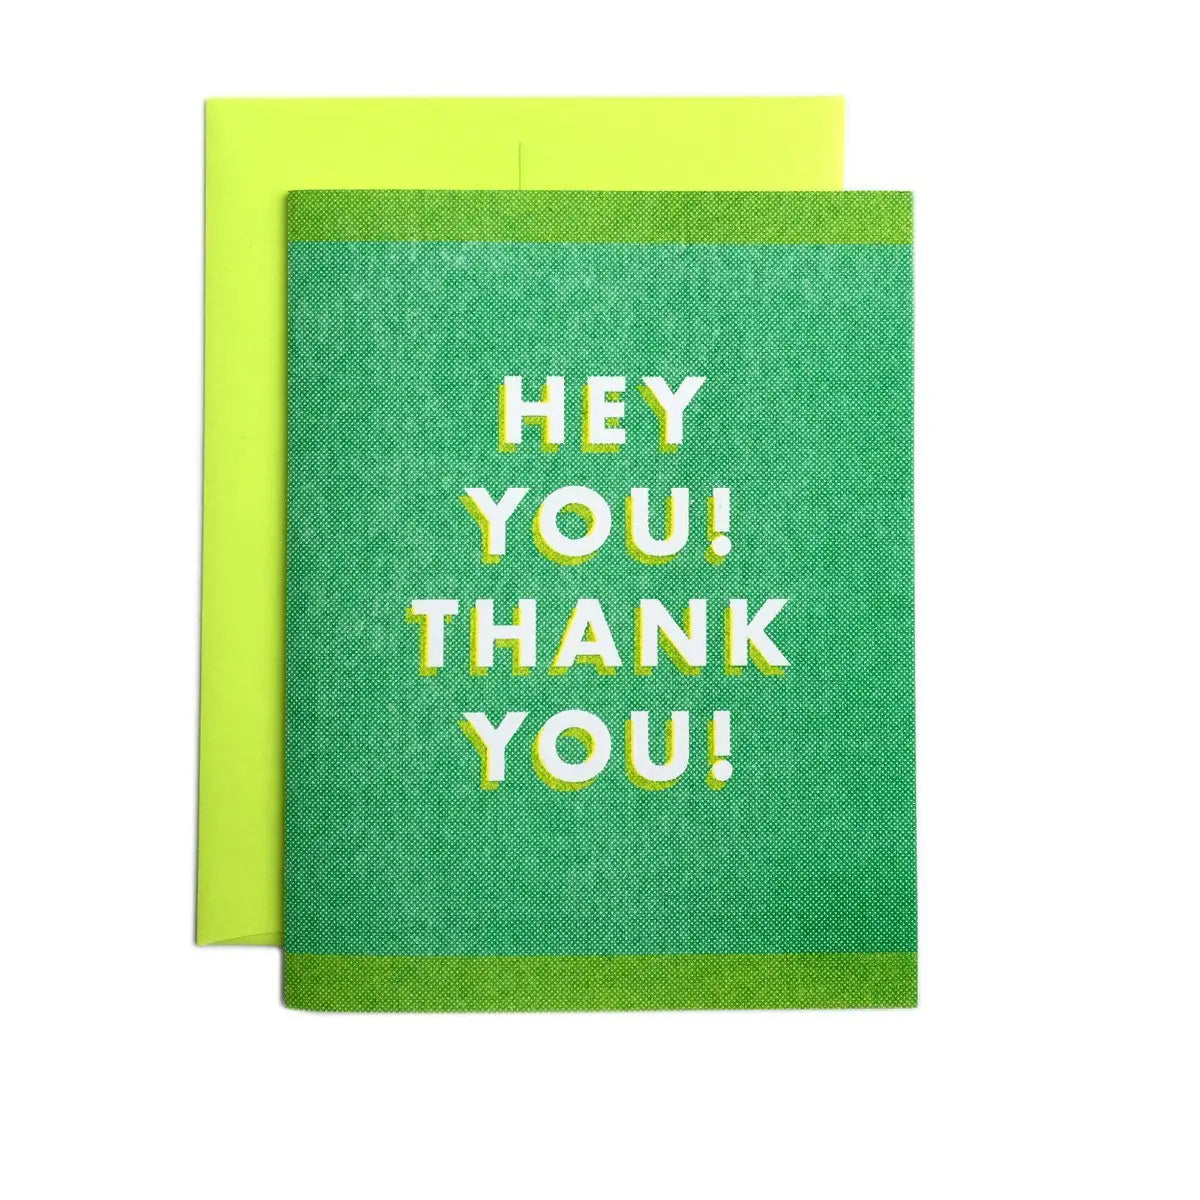 Green card with white text reading "hey you! thank you!" 